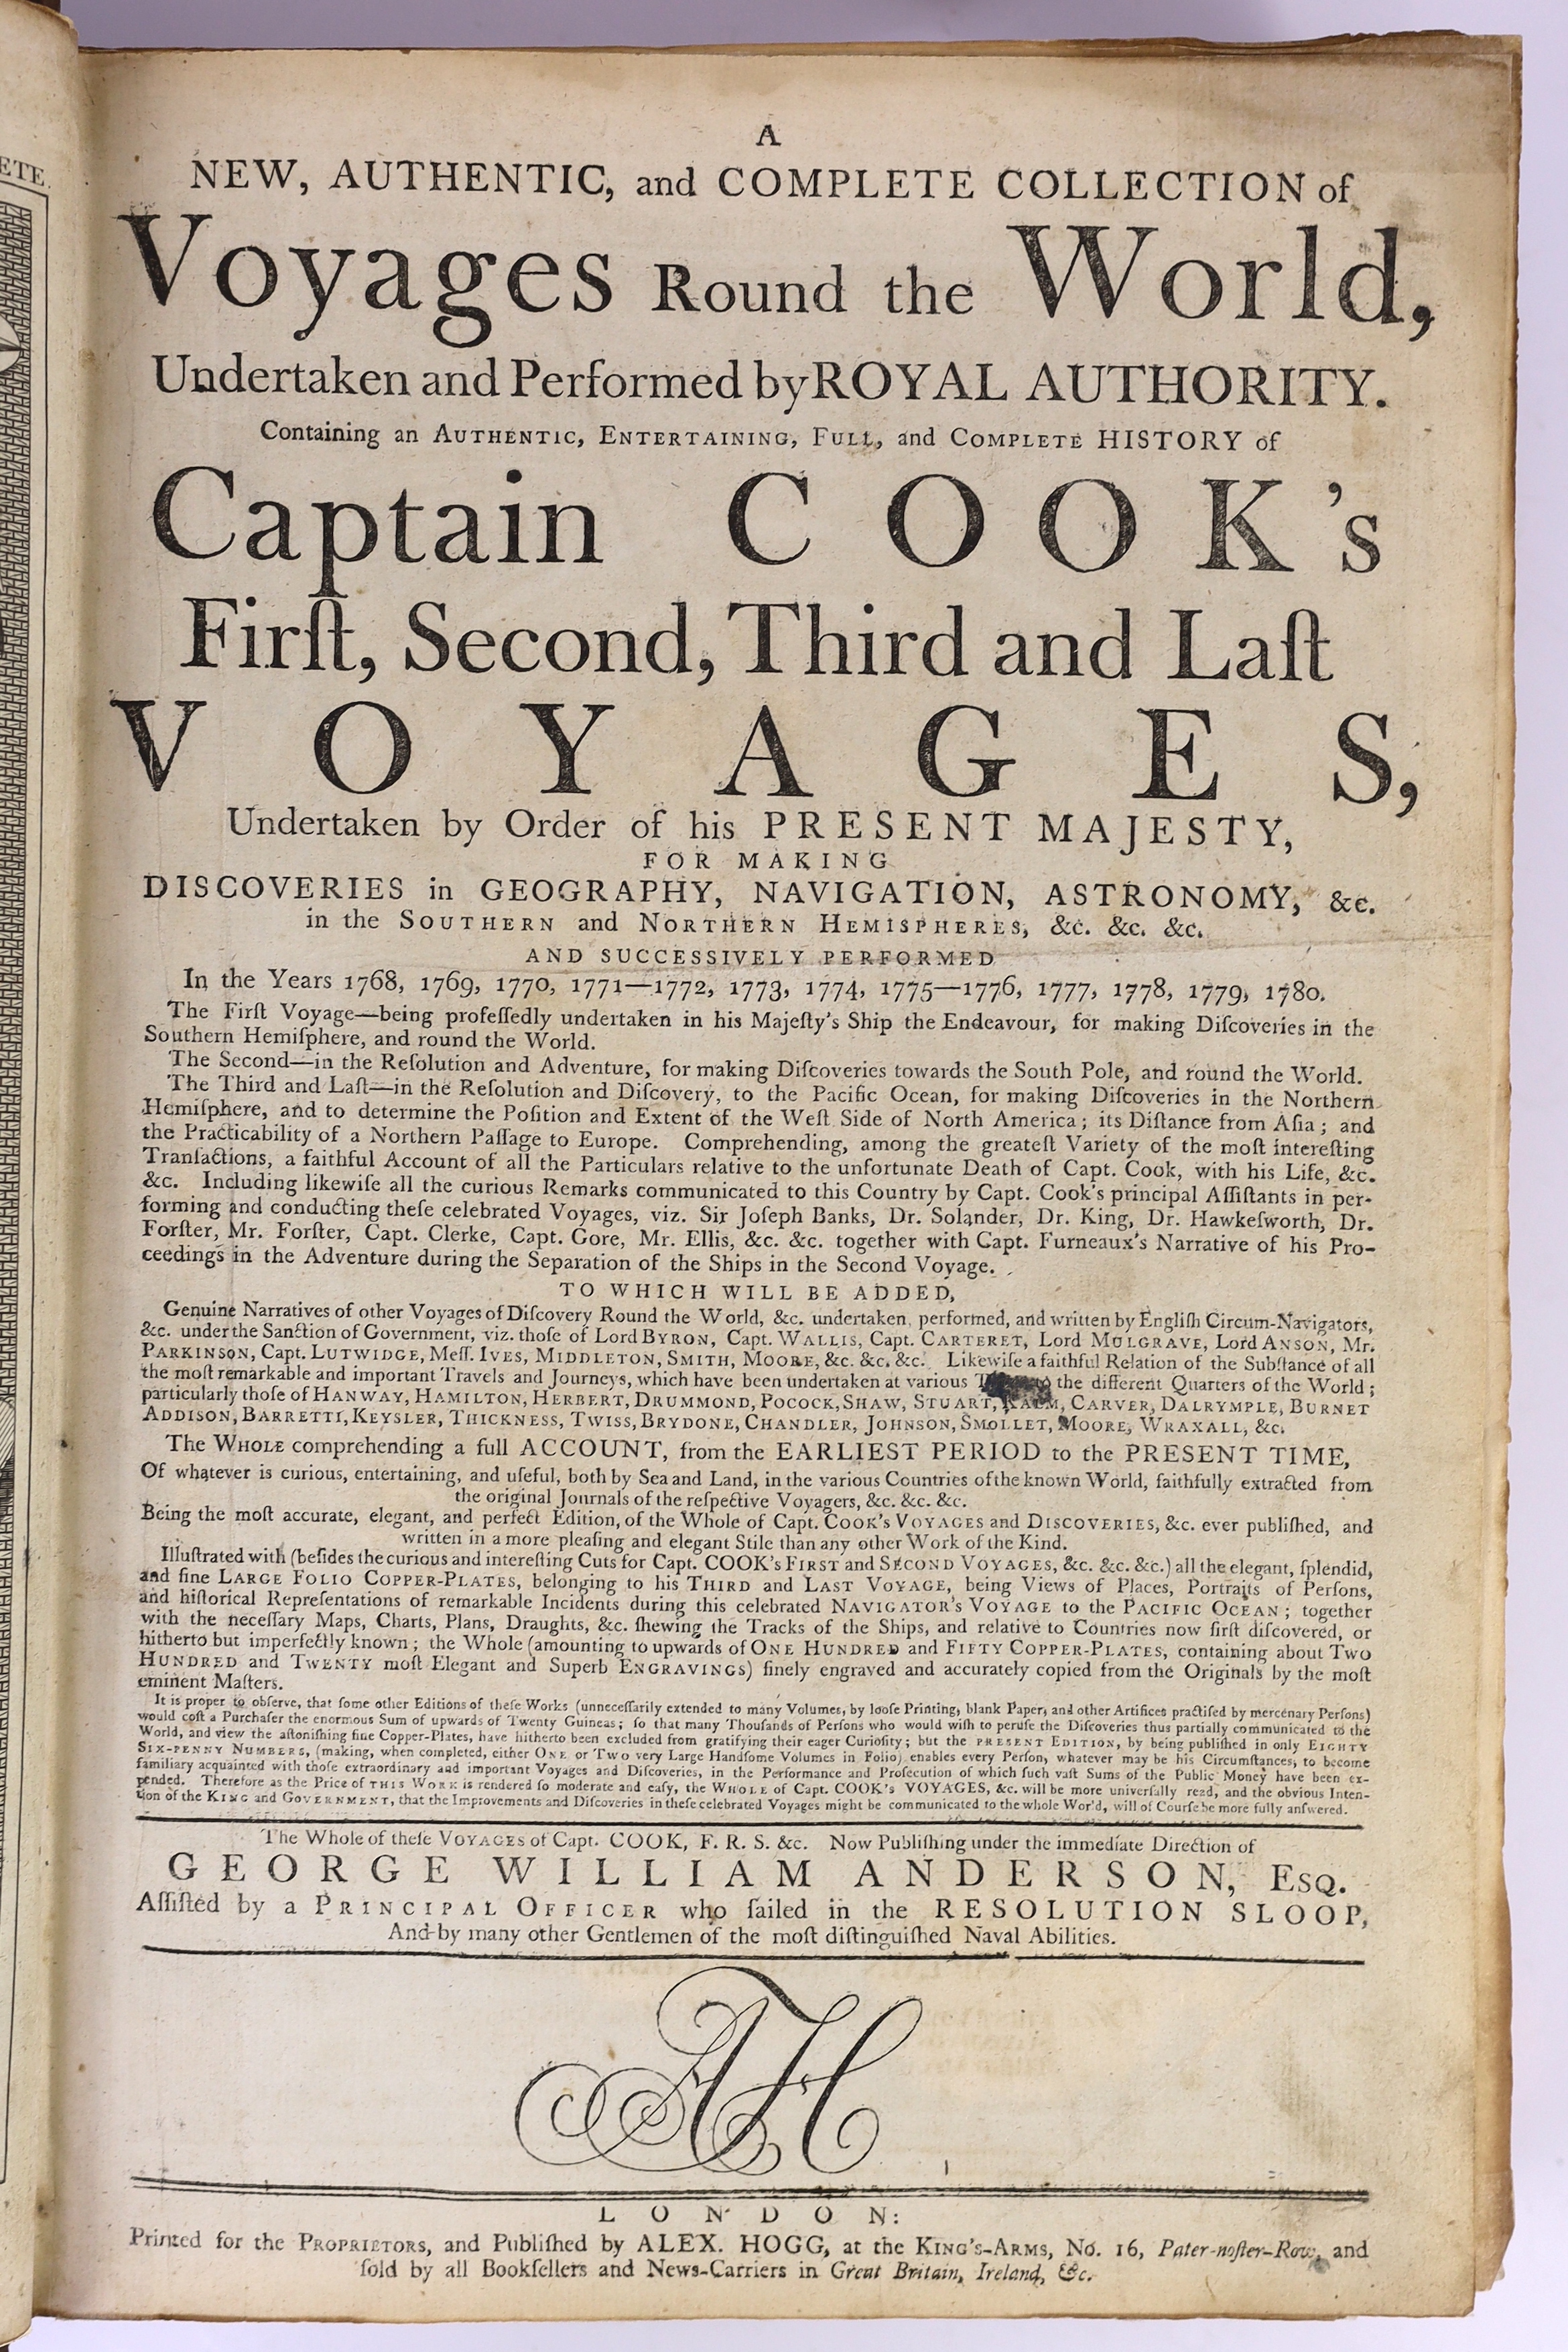 Cook, James - Anderson, George William. A New, Authentic, and Complete Collection of Voyages Round the World